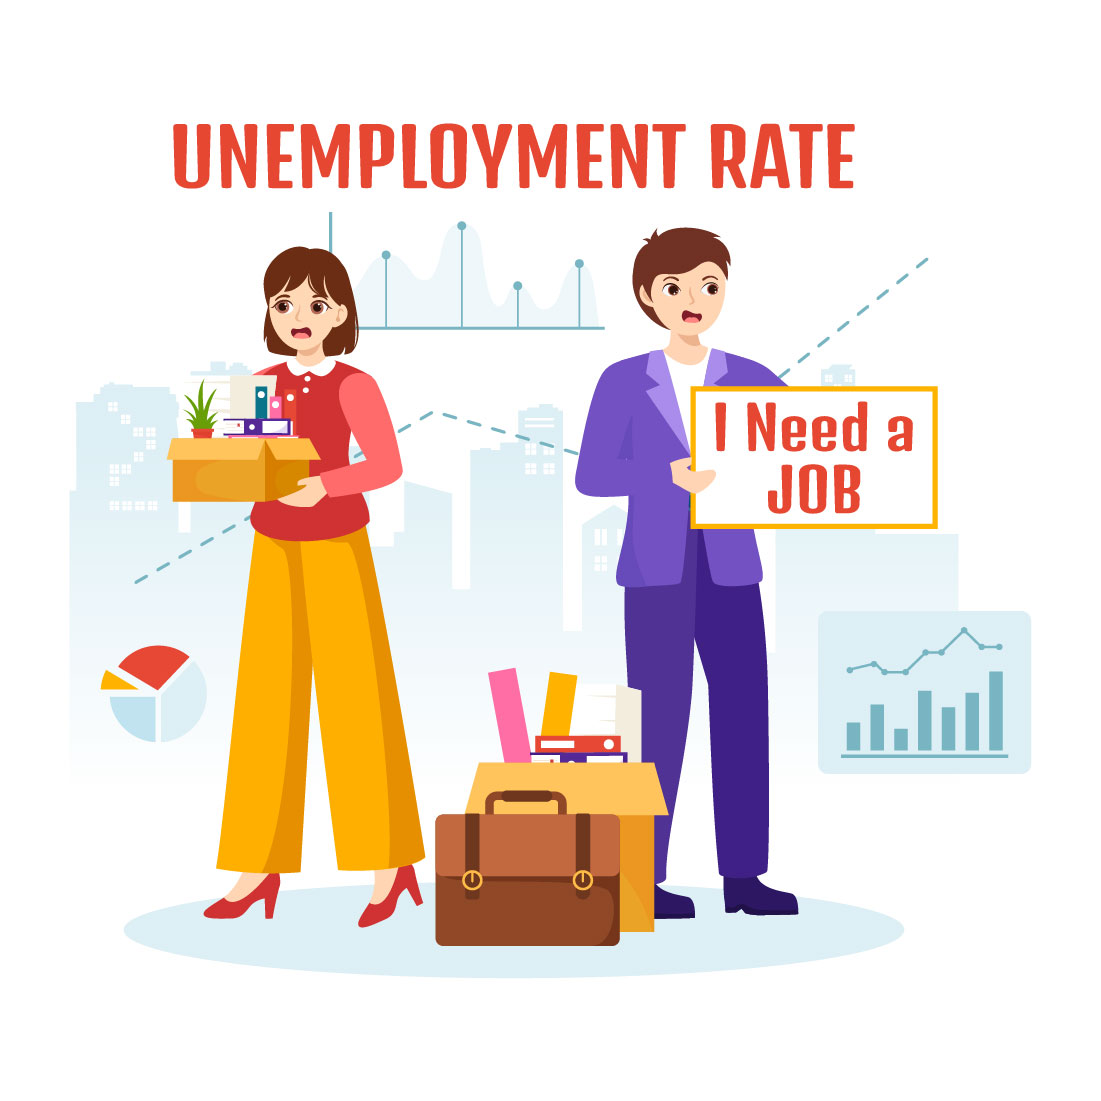 13 Unemployment Rate Illustration cover image.